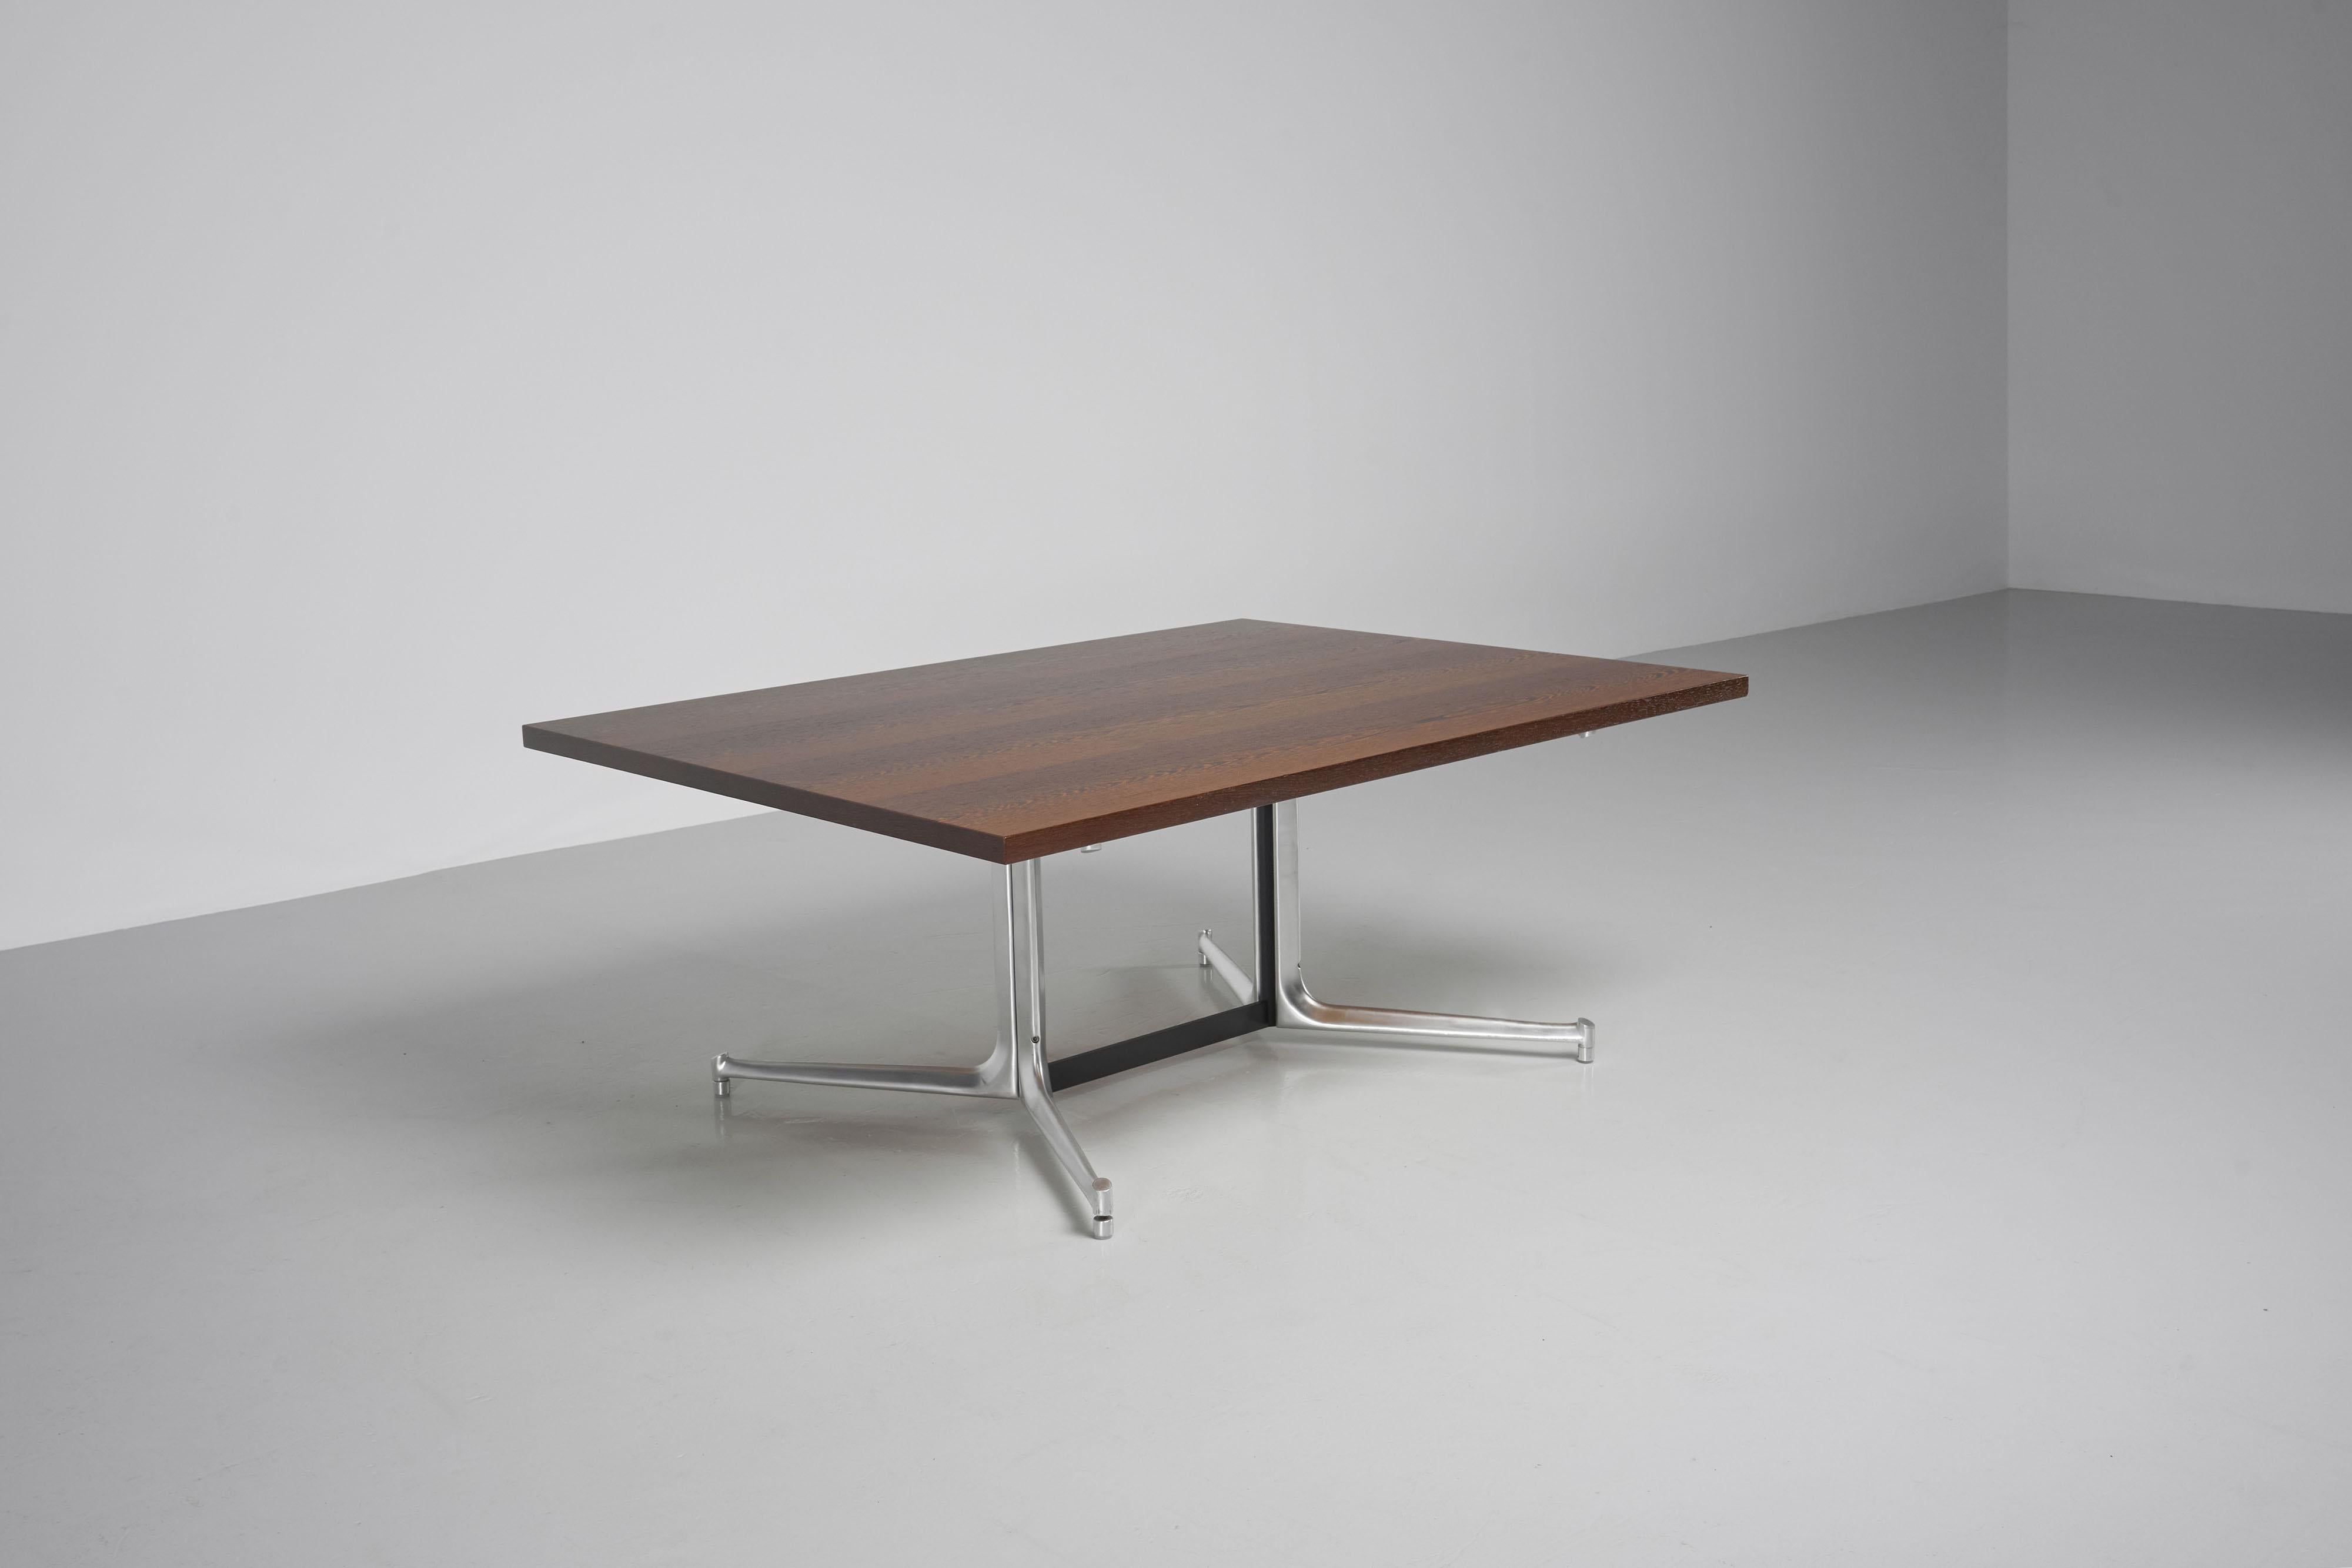 Highly rare dining or office table designed by Preben Fabricius and Jorgen Kastholm and manufactured by Kill International Fellbach, Germany 1968. This table has cast aluminium feet which are connected by a solid steel structure which is painted in